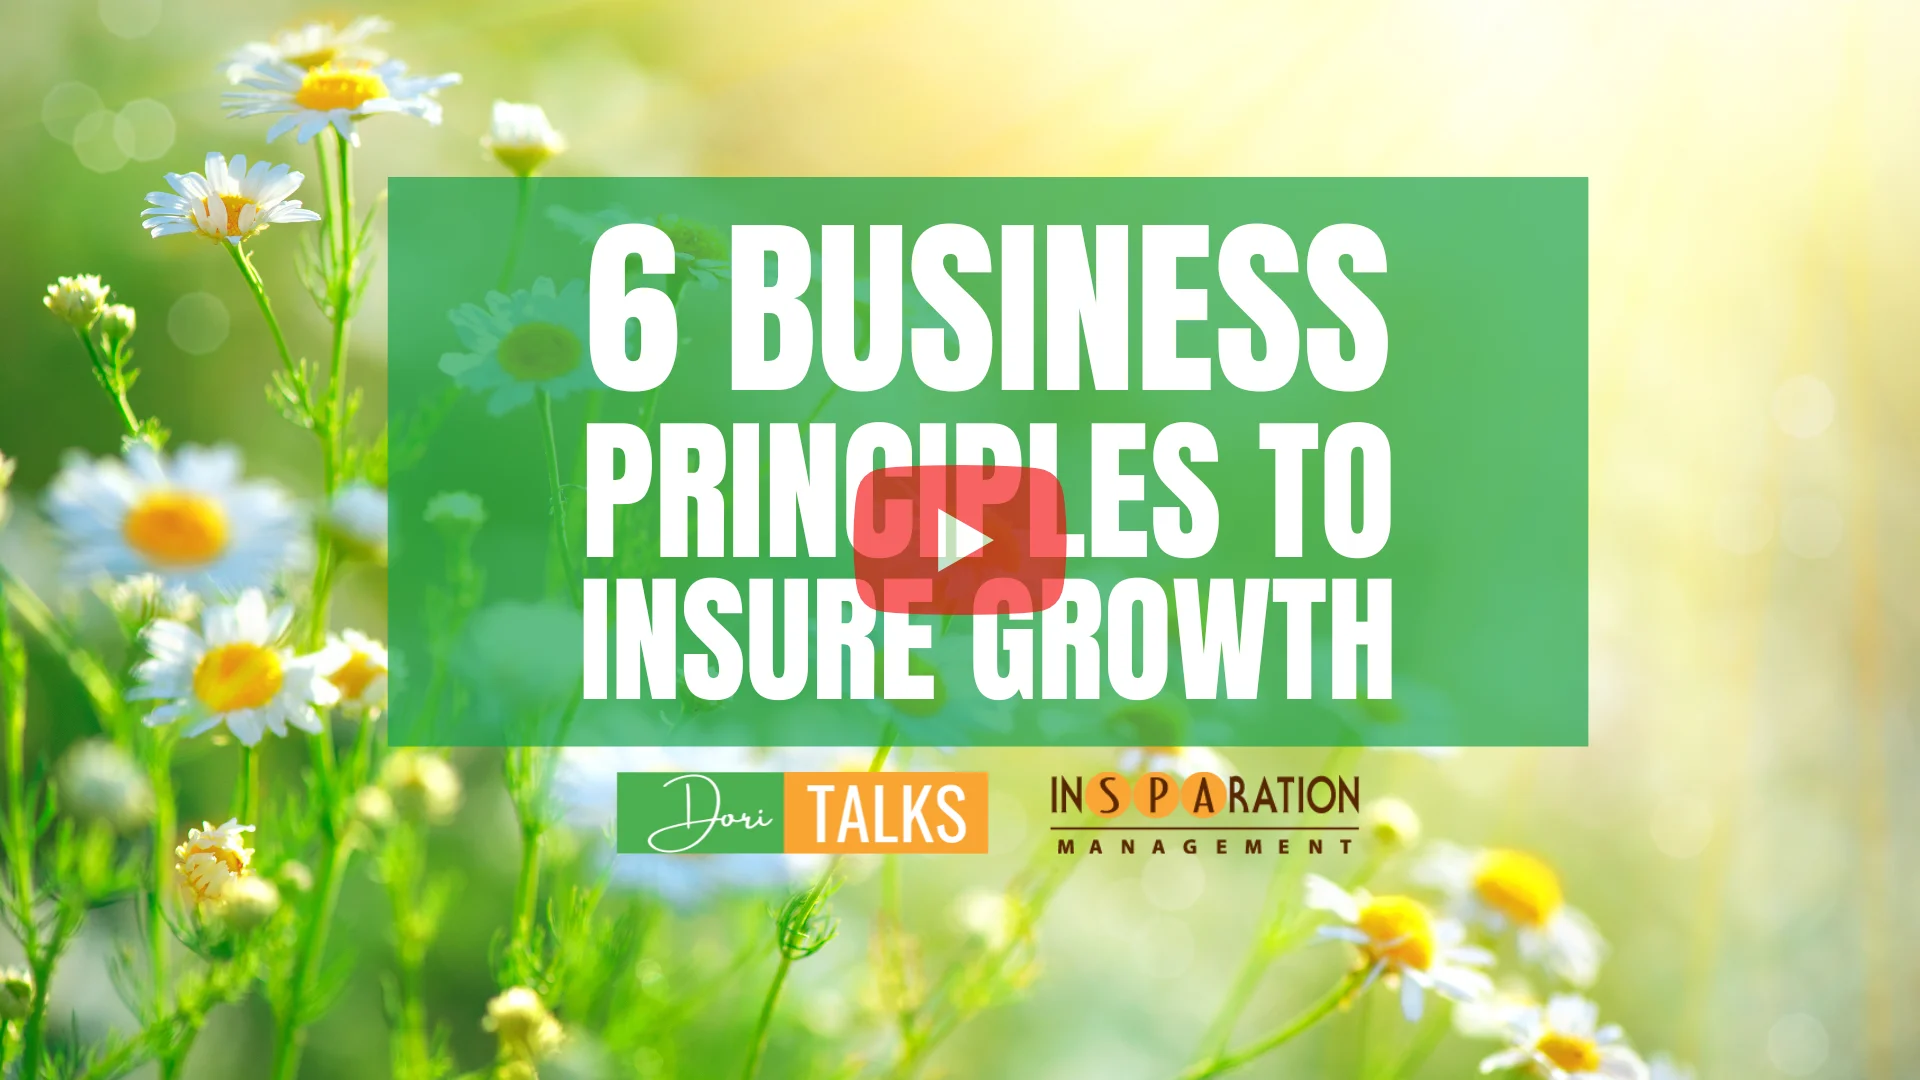 Six Medical Aesthetics Business Principles to Insure Growth